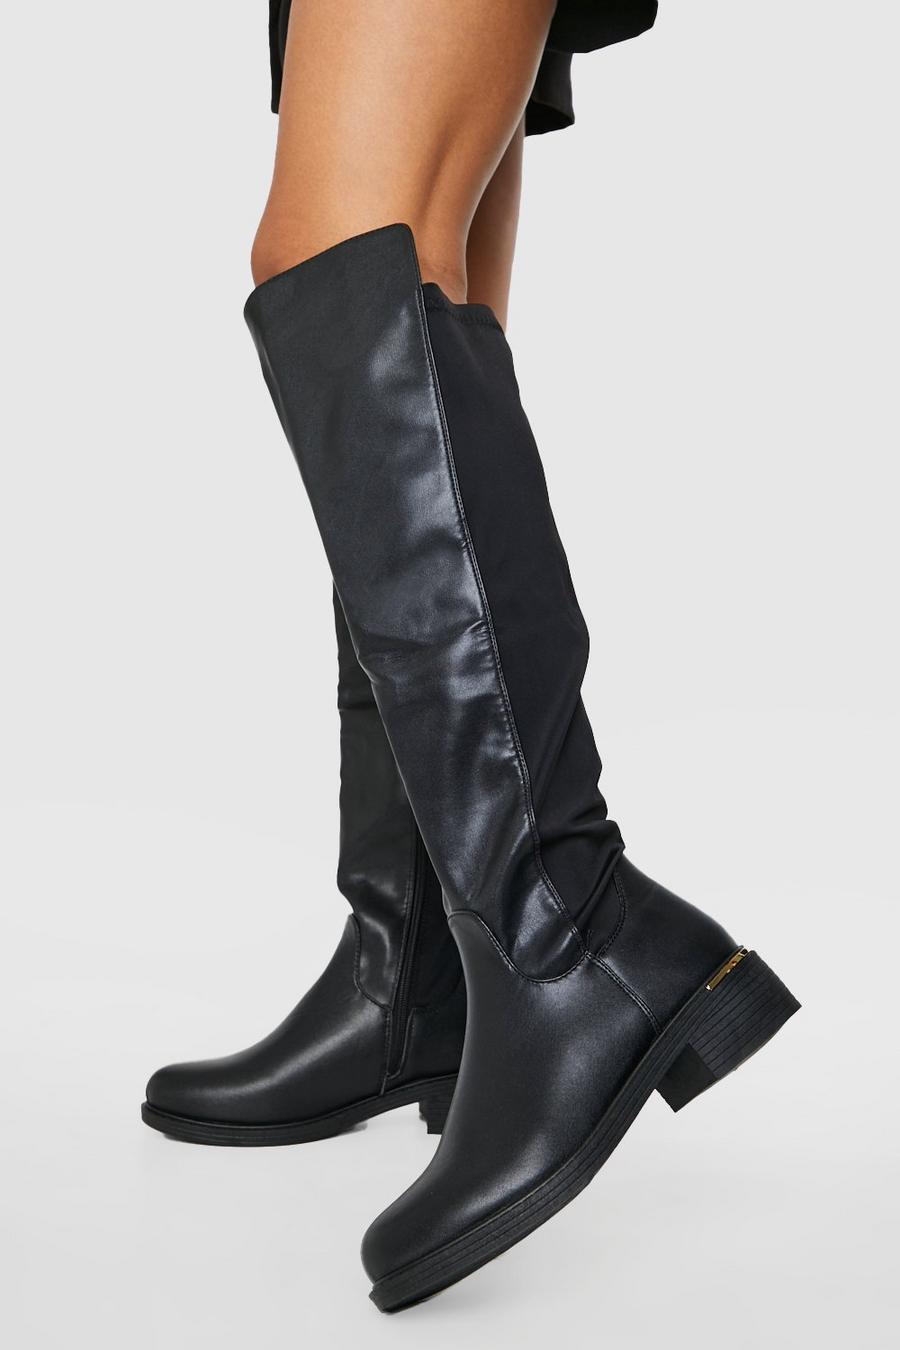 Black Contrast Panel Knee High Boots